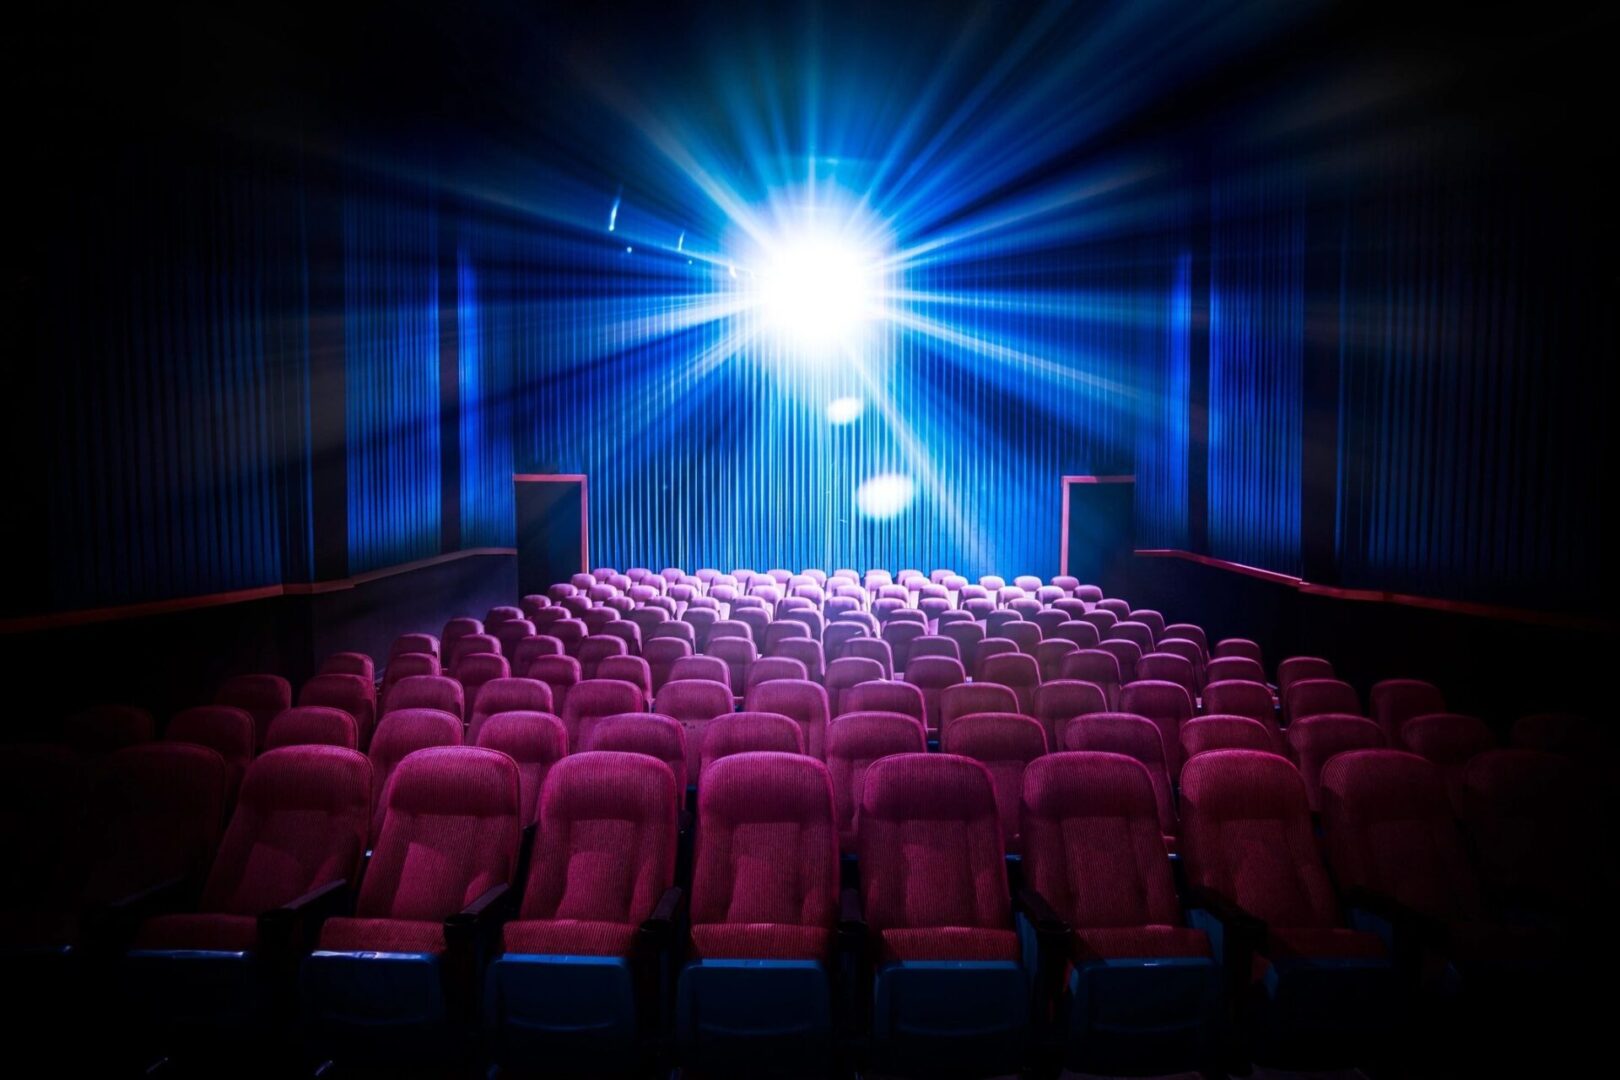 A theater with rows of seats and a projector.